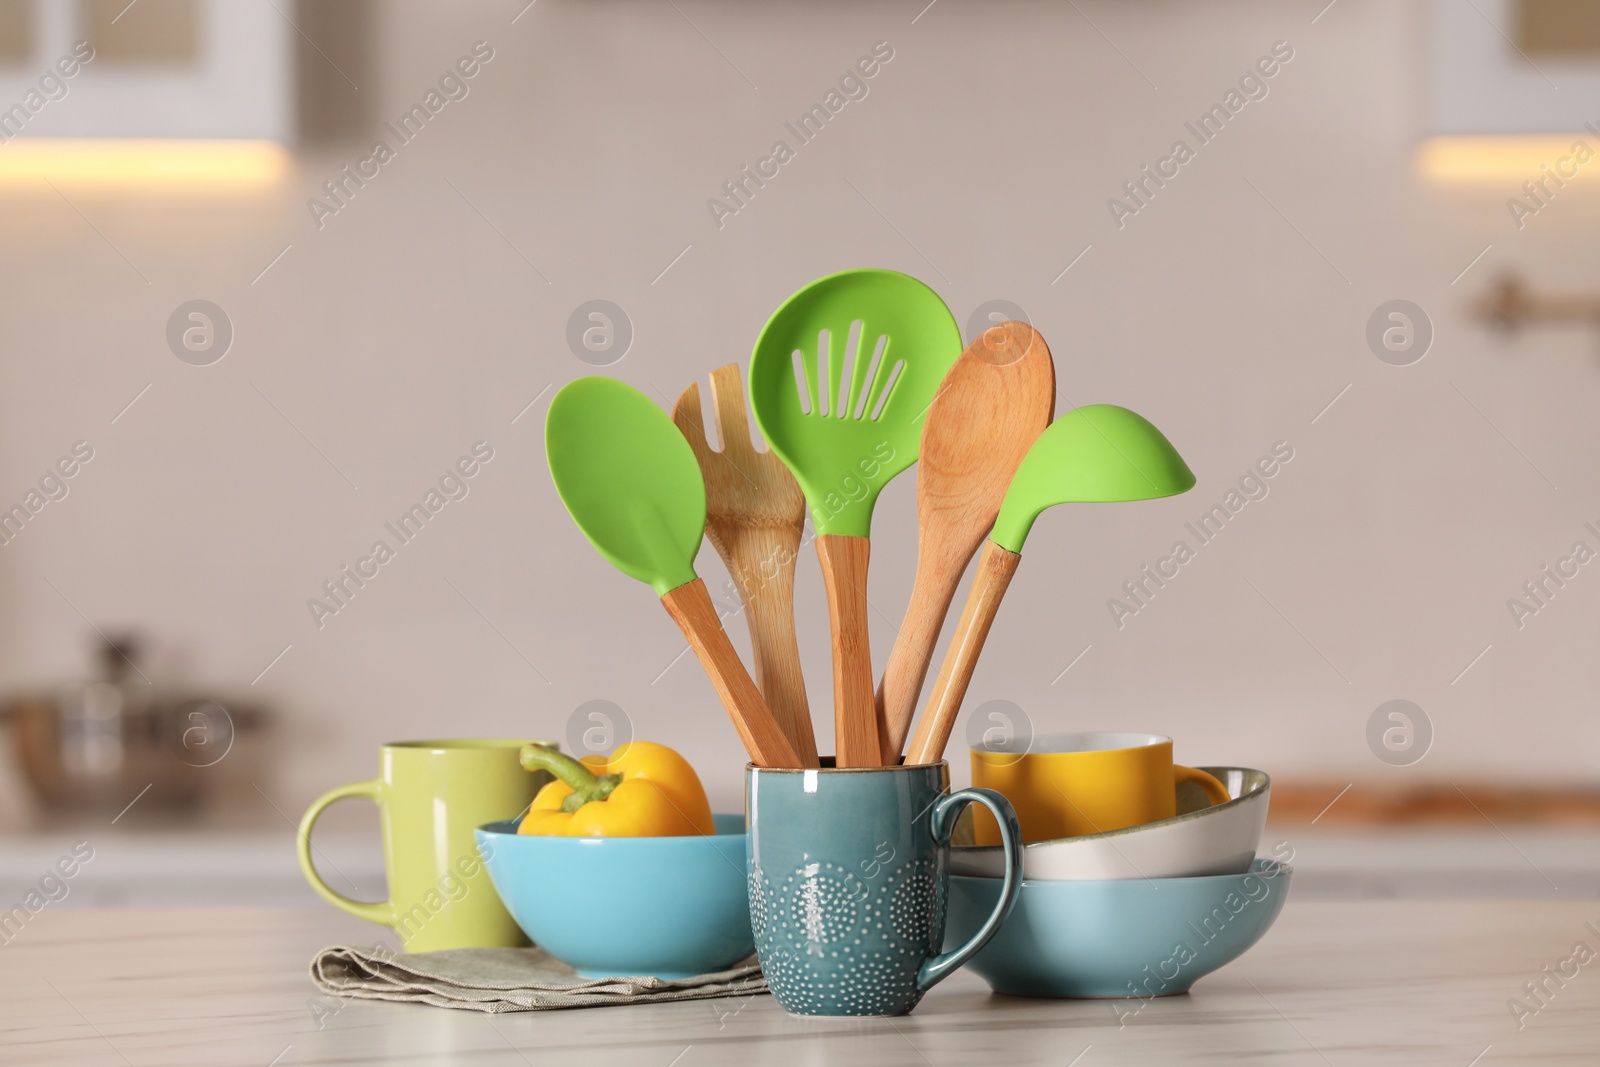 Photo of Set of different cooking utensils and ceramic dishes on white table in kitchen